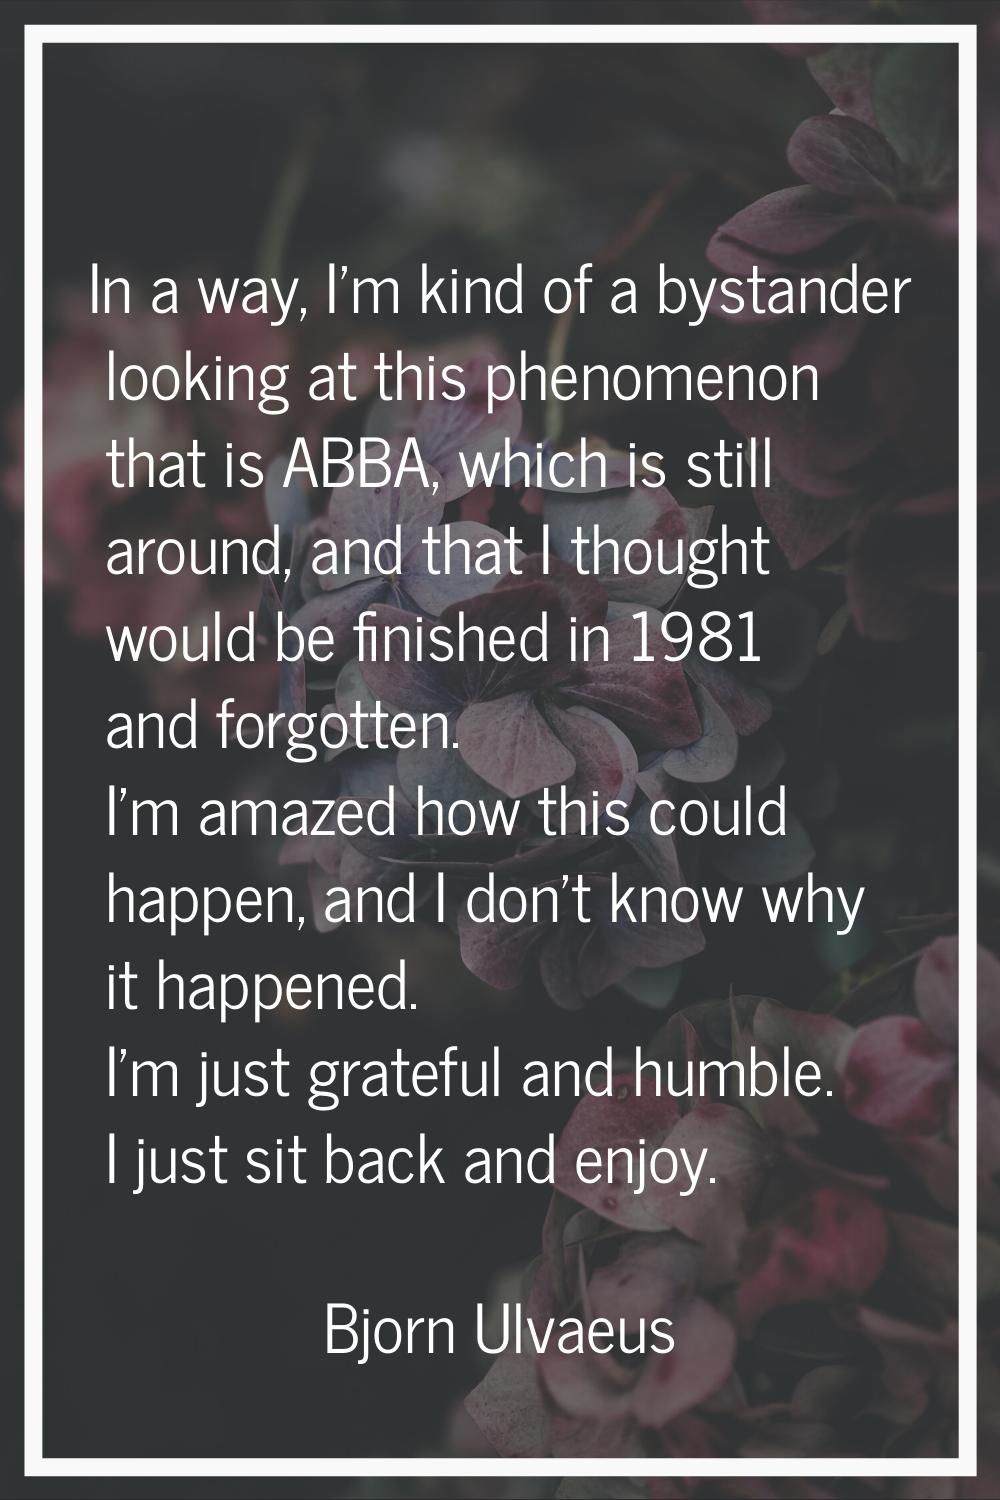 In a way, I'm kind of a bystander looking at this phenomenon that is ABBA, which is still around, a